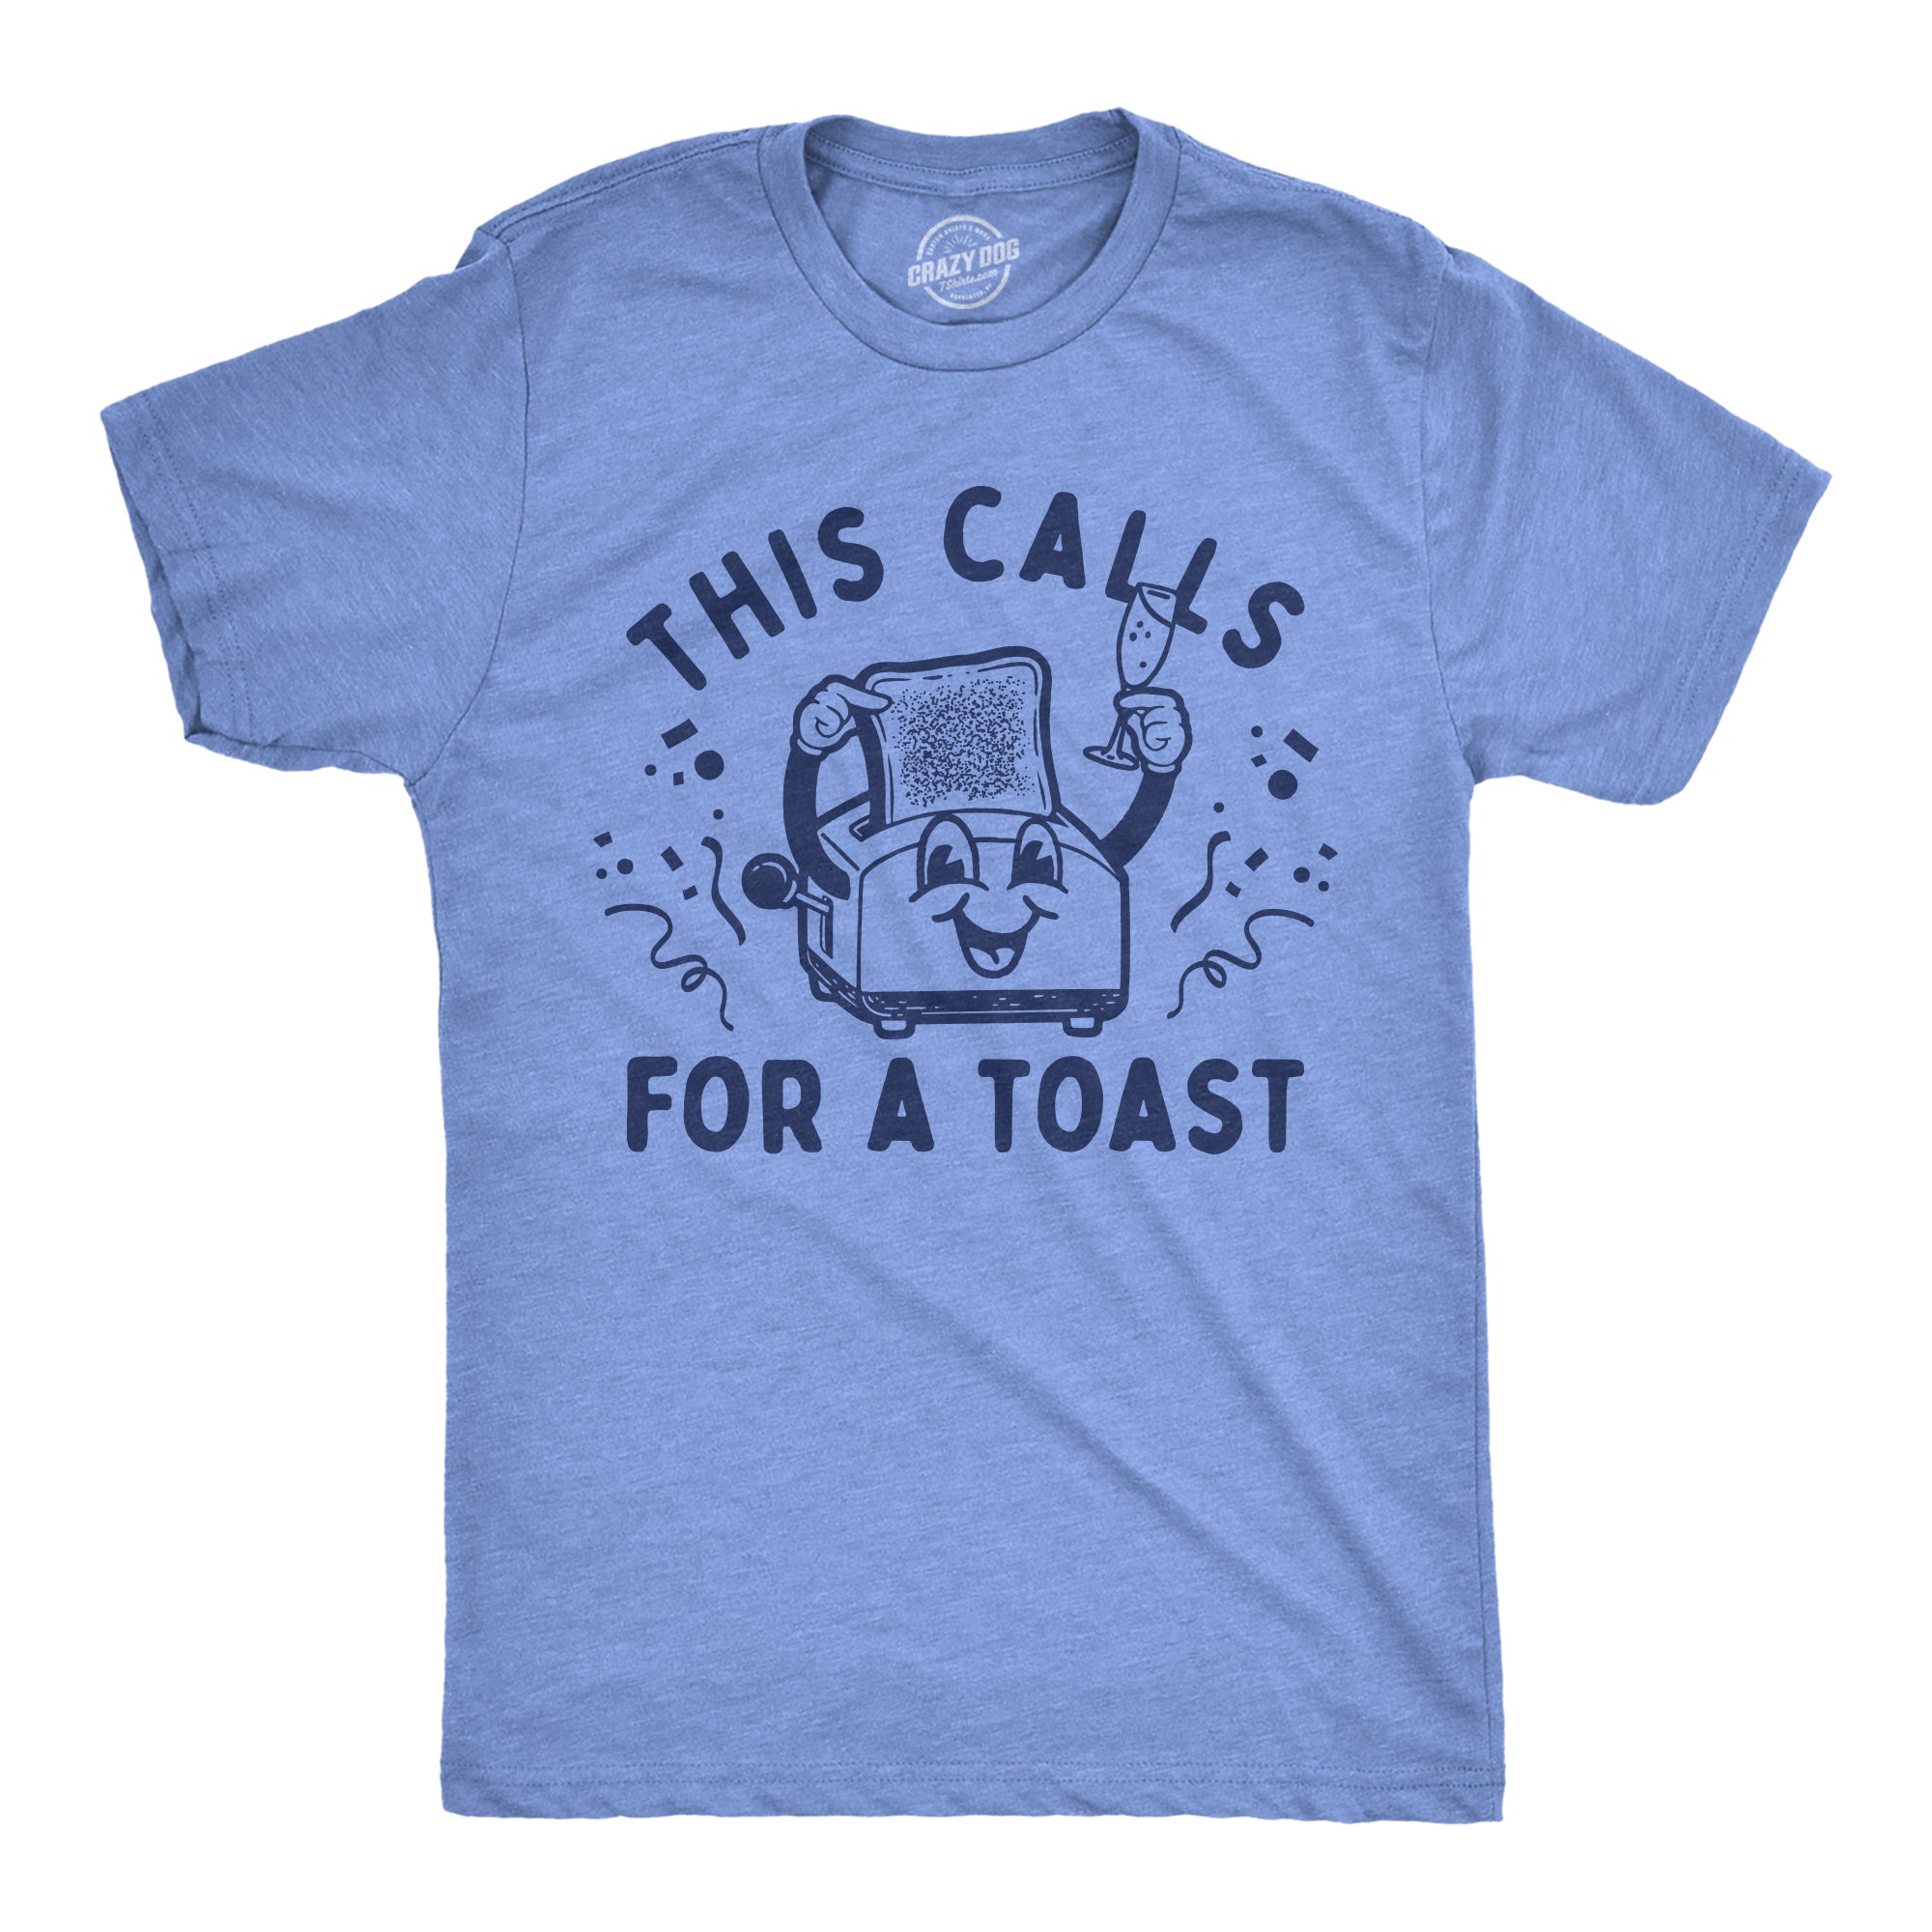 Funny Light Heather Blue - A Toast This Calls For A Toast Mens T Shirt Nerdy Food sarcastic Tee